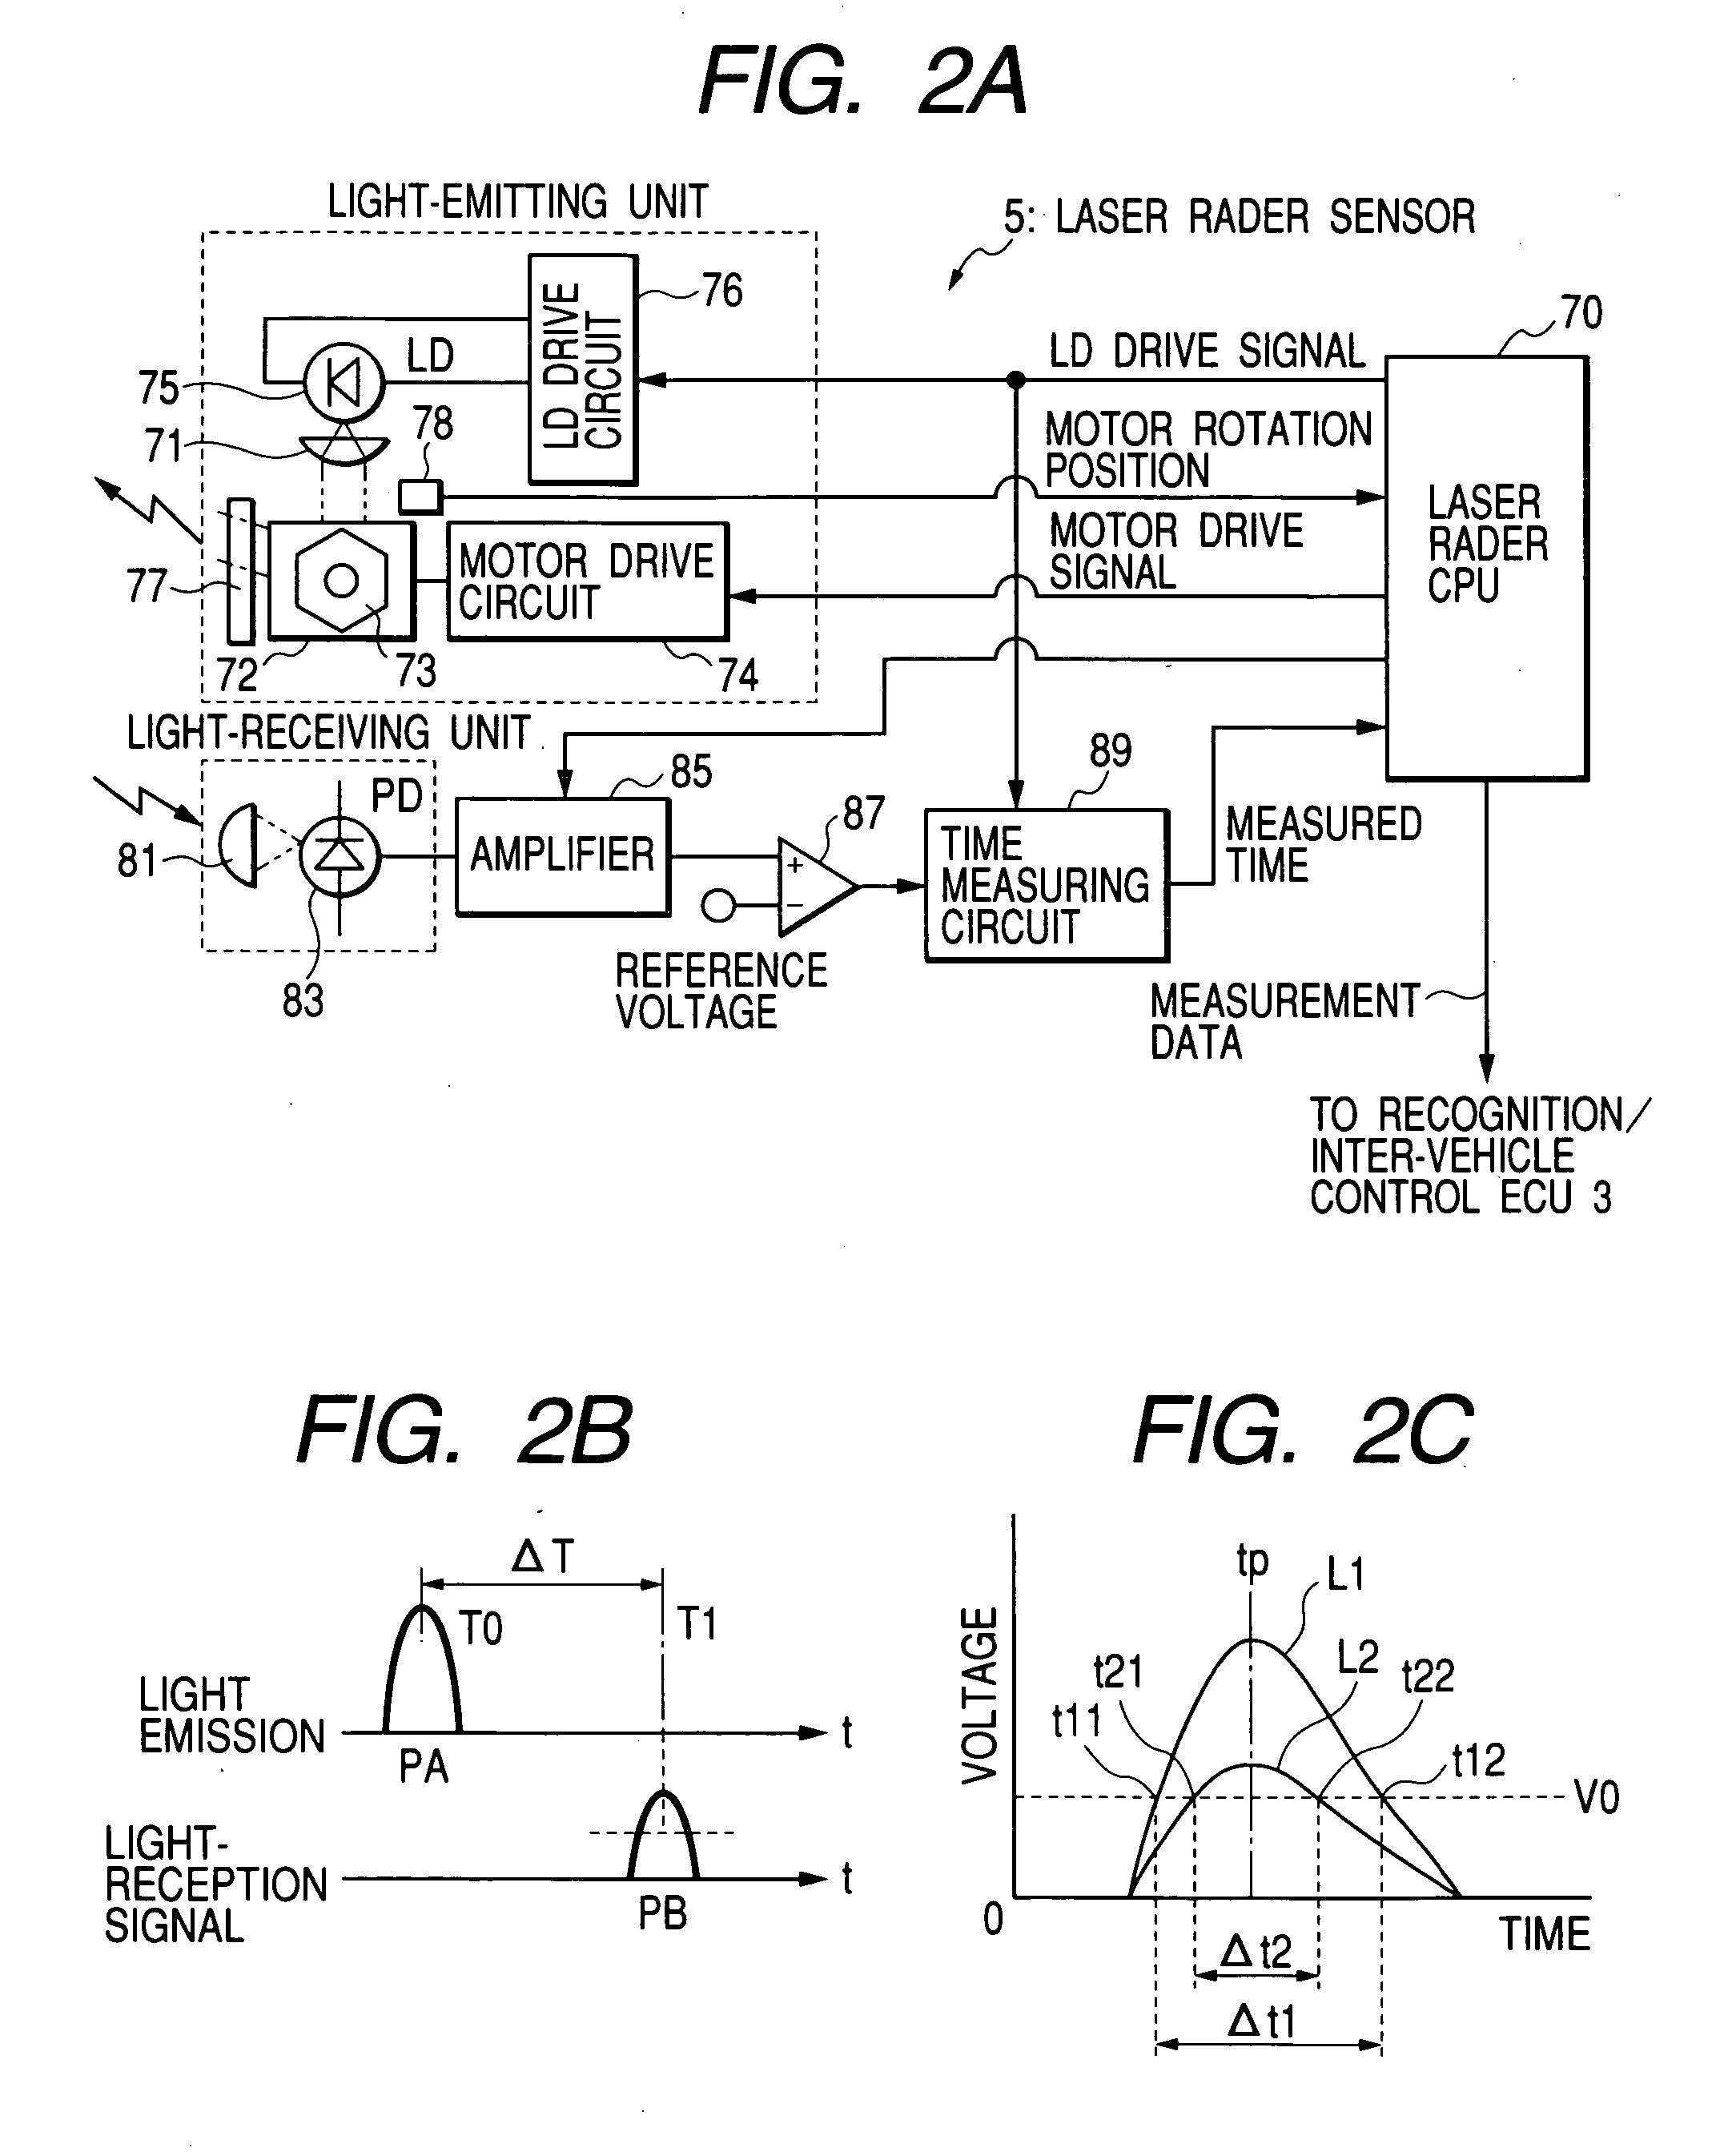 Object recognition apparatus for vehicle, inter-vehicle control apparatus, and distance measurement apparatus